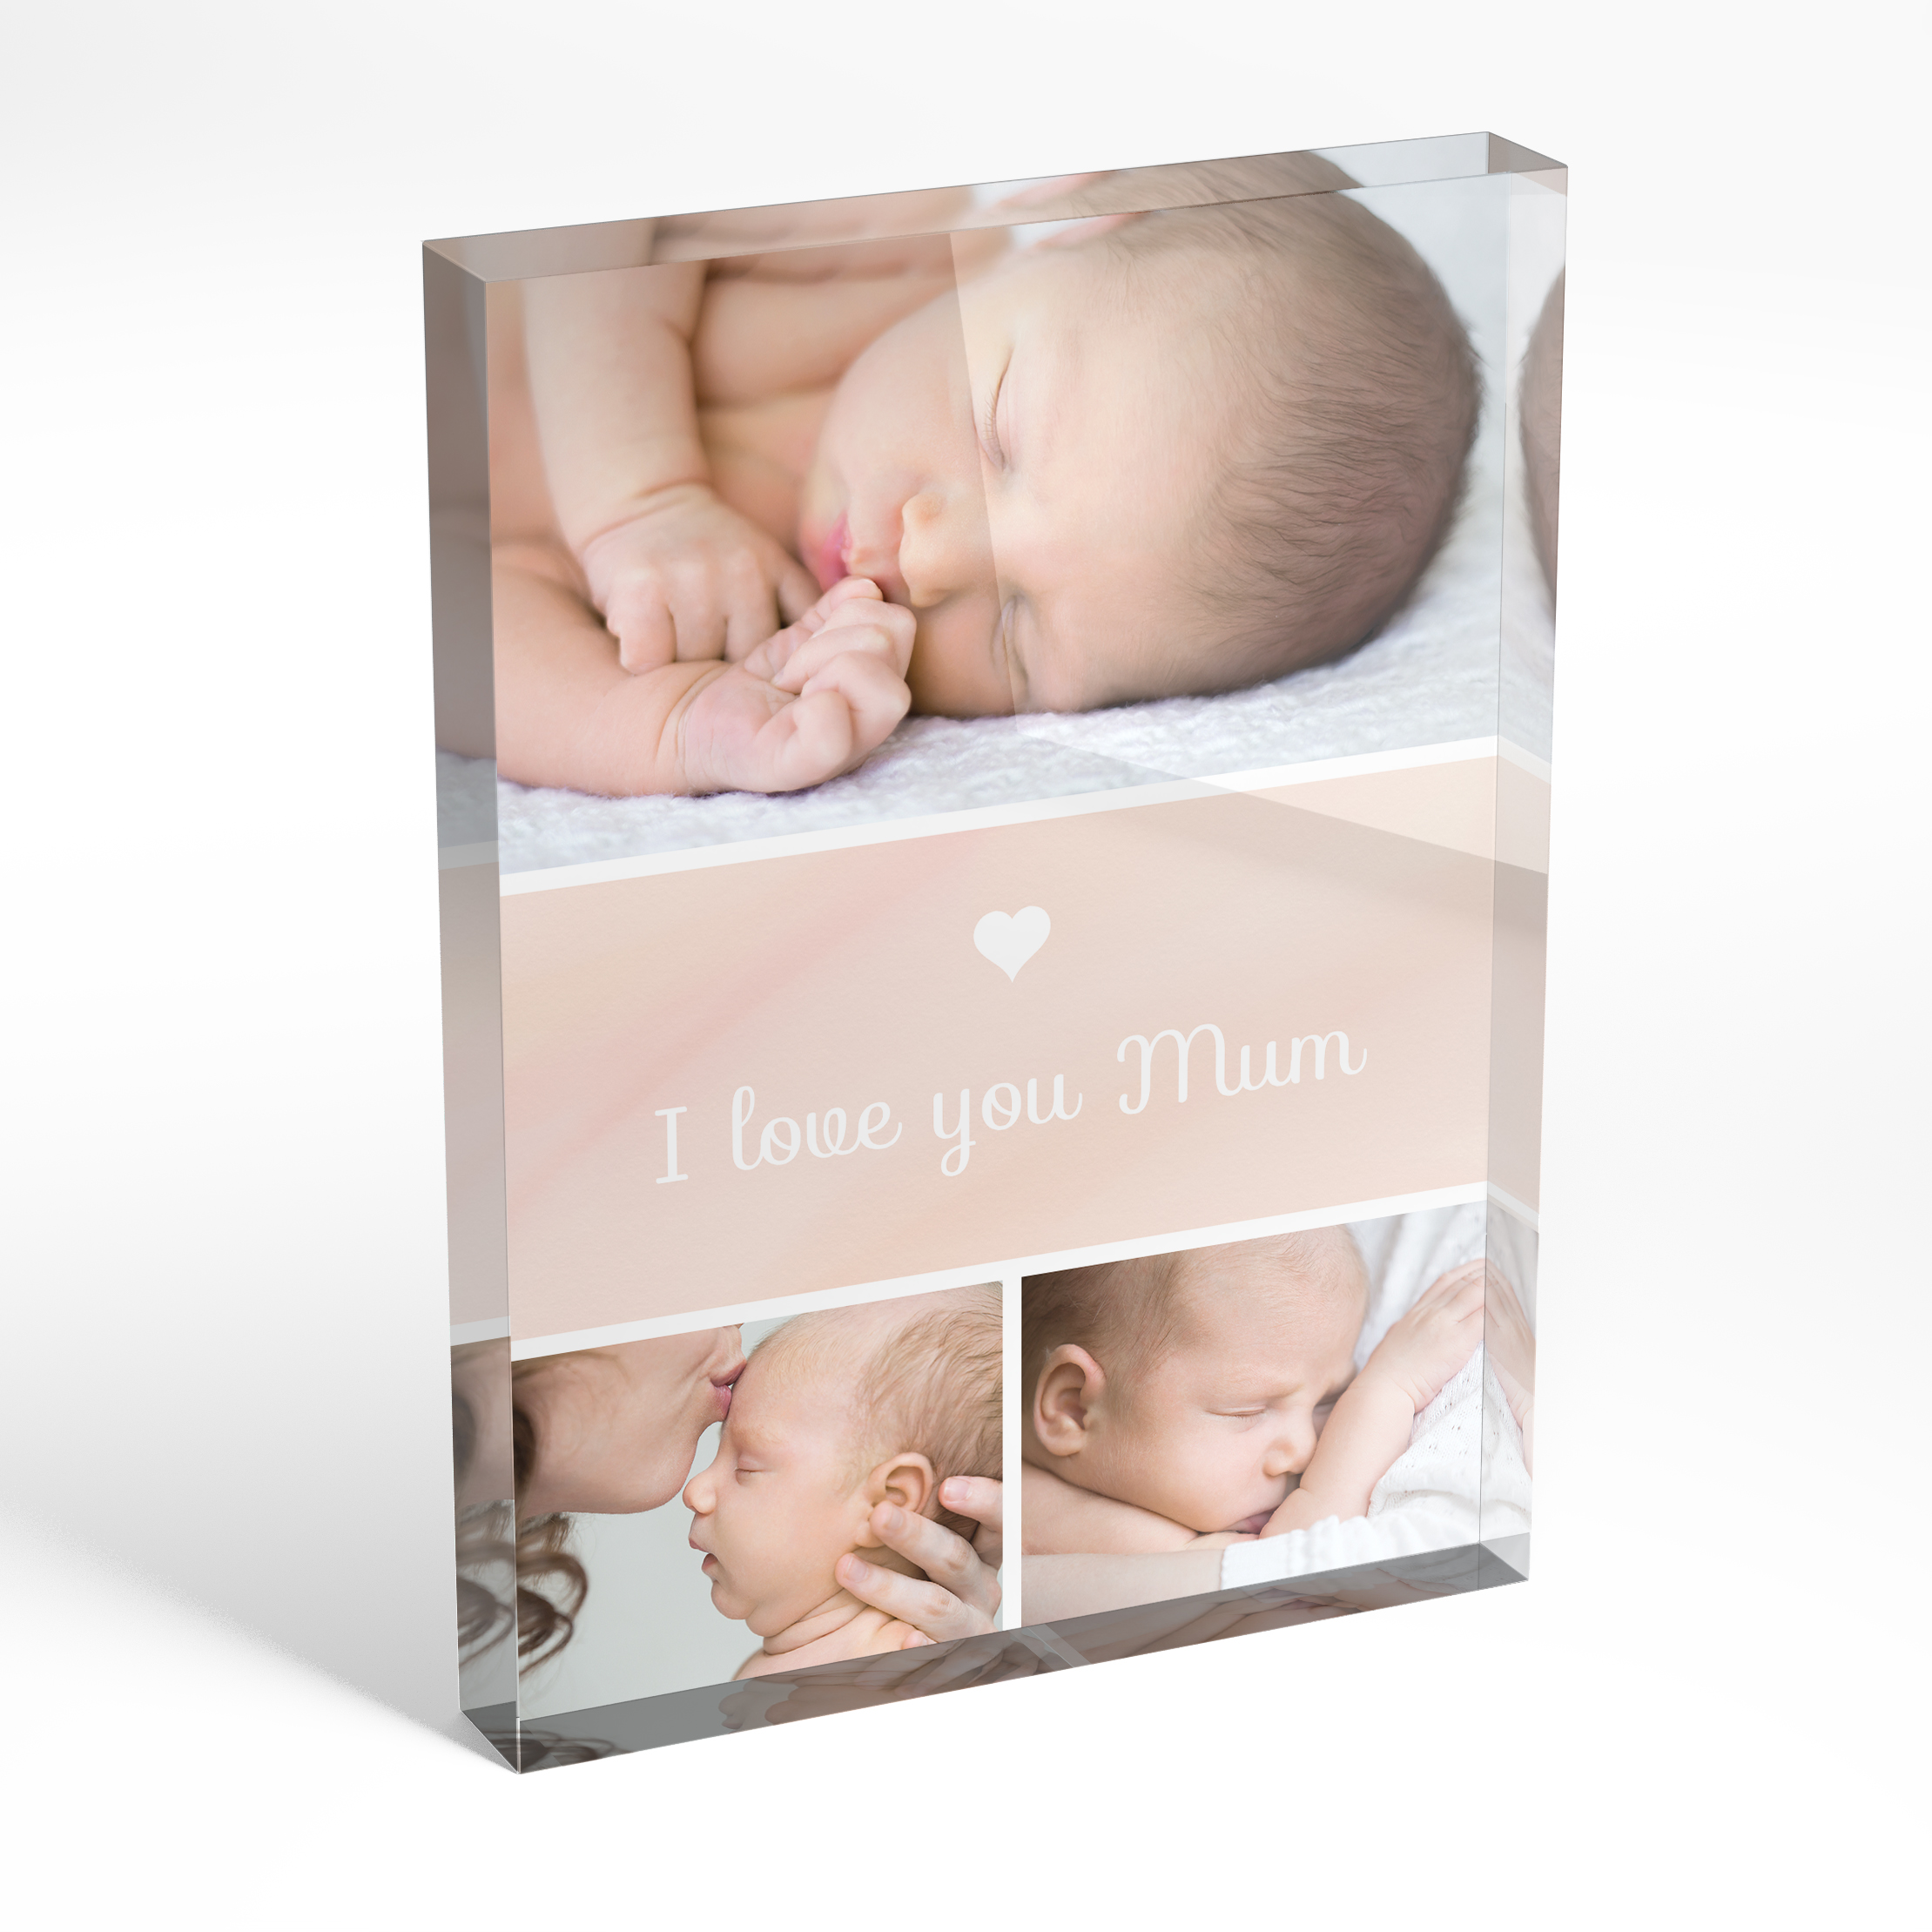 An angled side view of a portrait layout Acrylic Photo Block with space for 3 photos. Thiis design is named "Mum's Day Trio". 